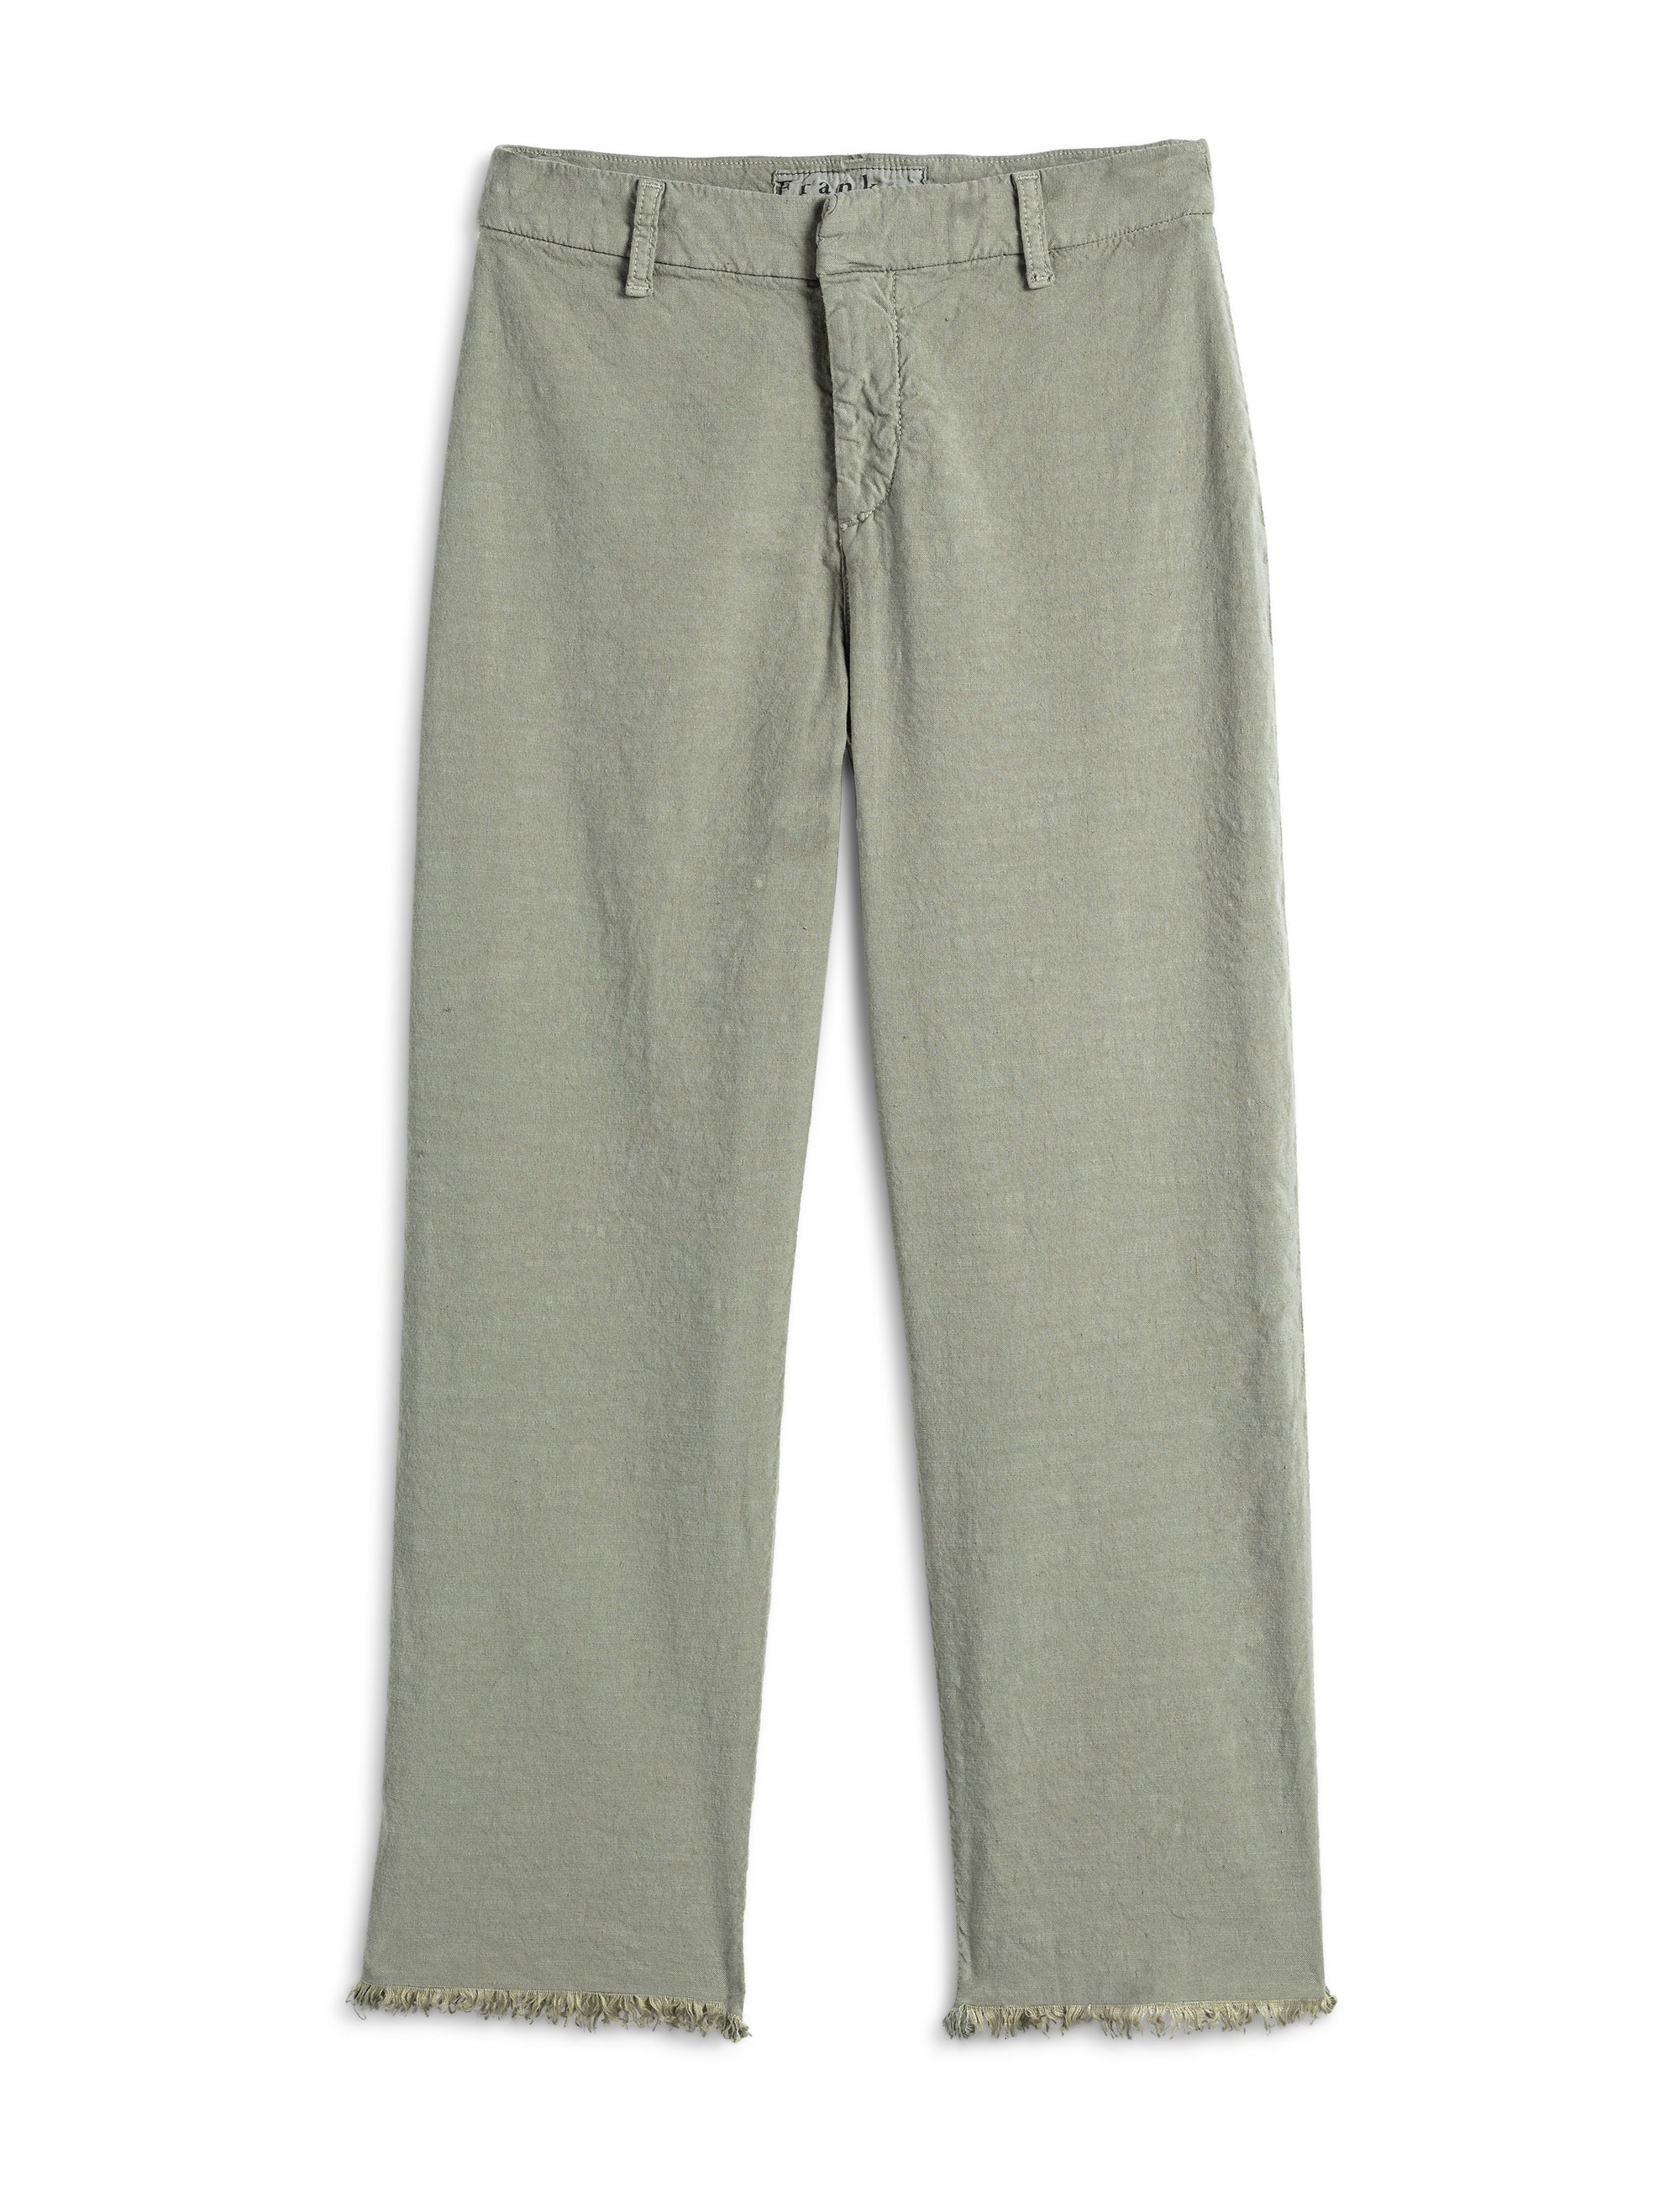 FRANK AND EILEEN - KINSALE TROUSER IN PERFORMANCE LINEN SAGE